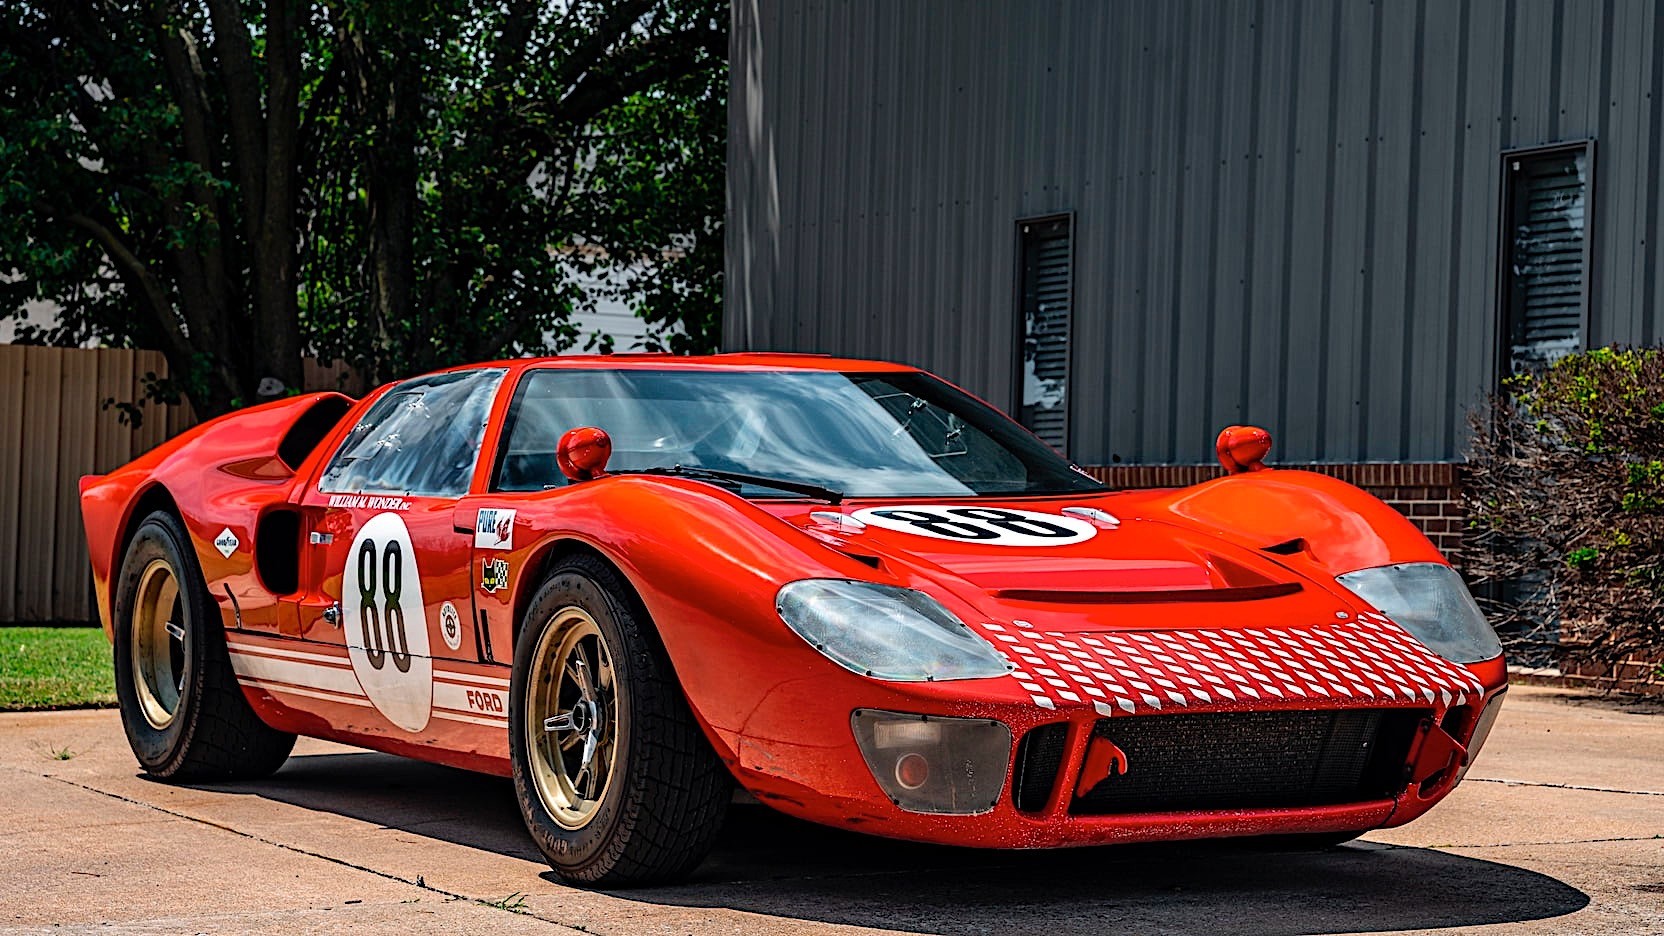 Used 1967 Ford GT40 / Ford vs Ferrari Movie Car / Certificate of  Authenticity For Sale ($254,995)